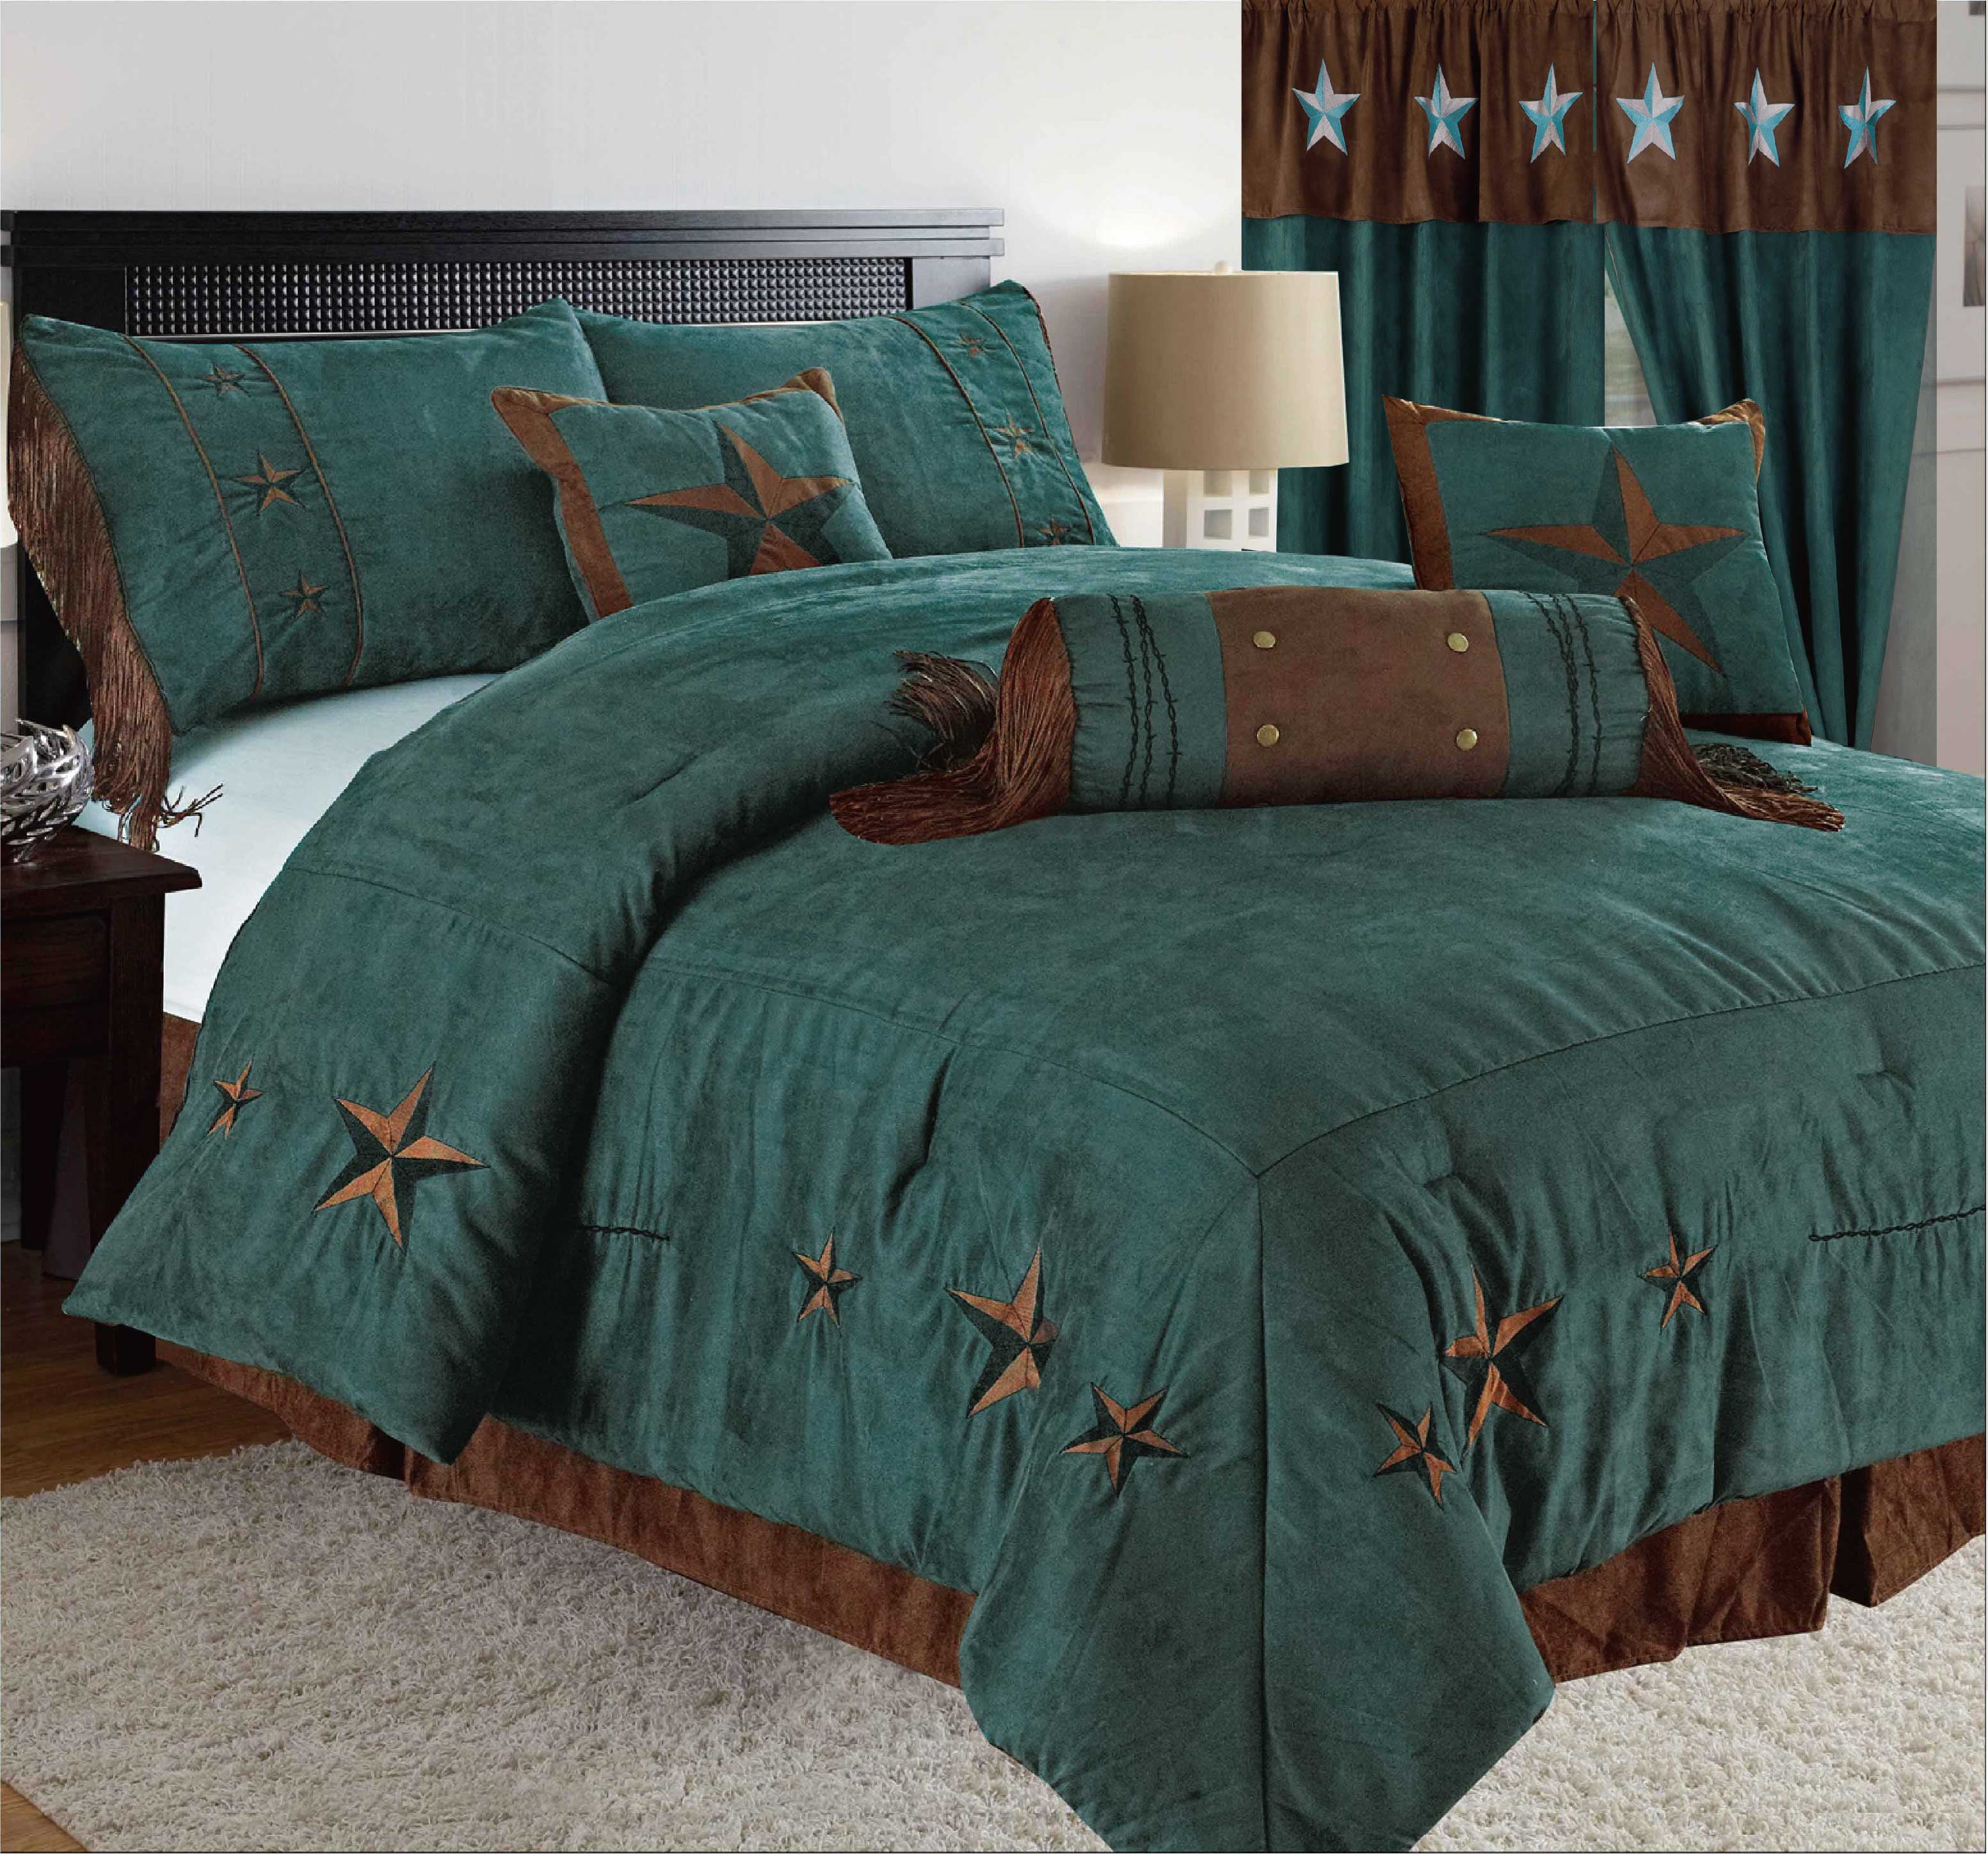 Comforter Set Turquoise Cross Country Western Rustic Bedding Decor 